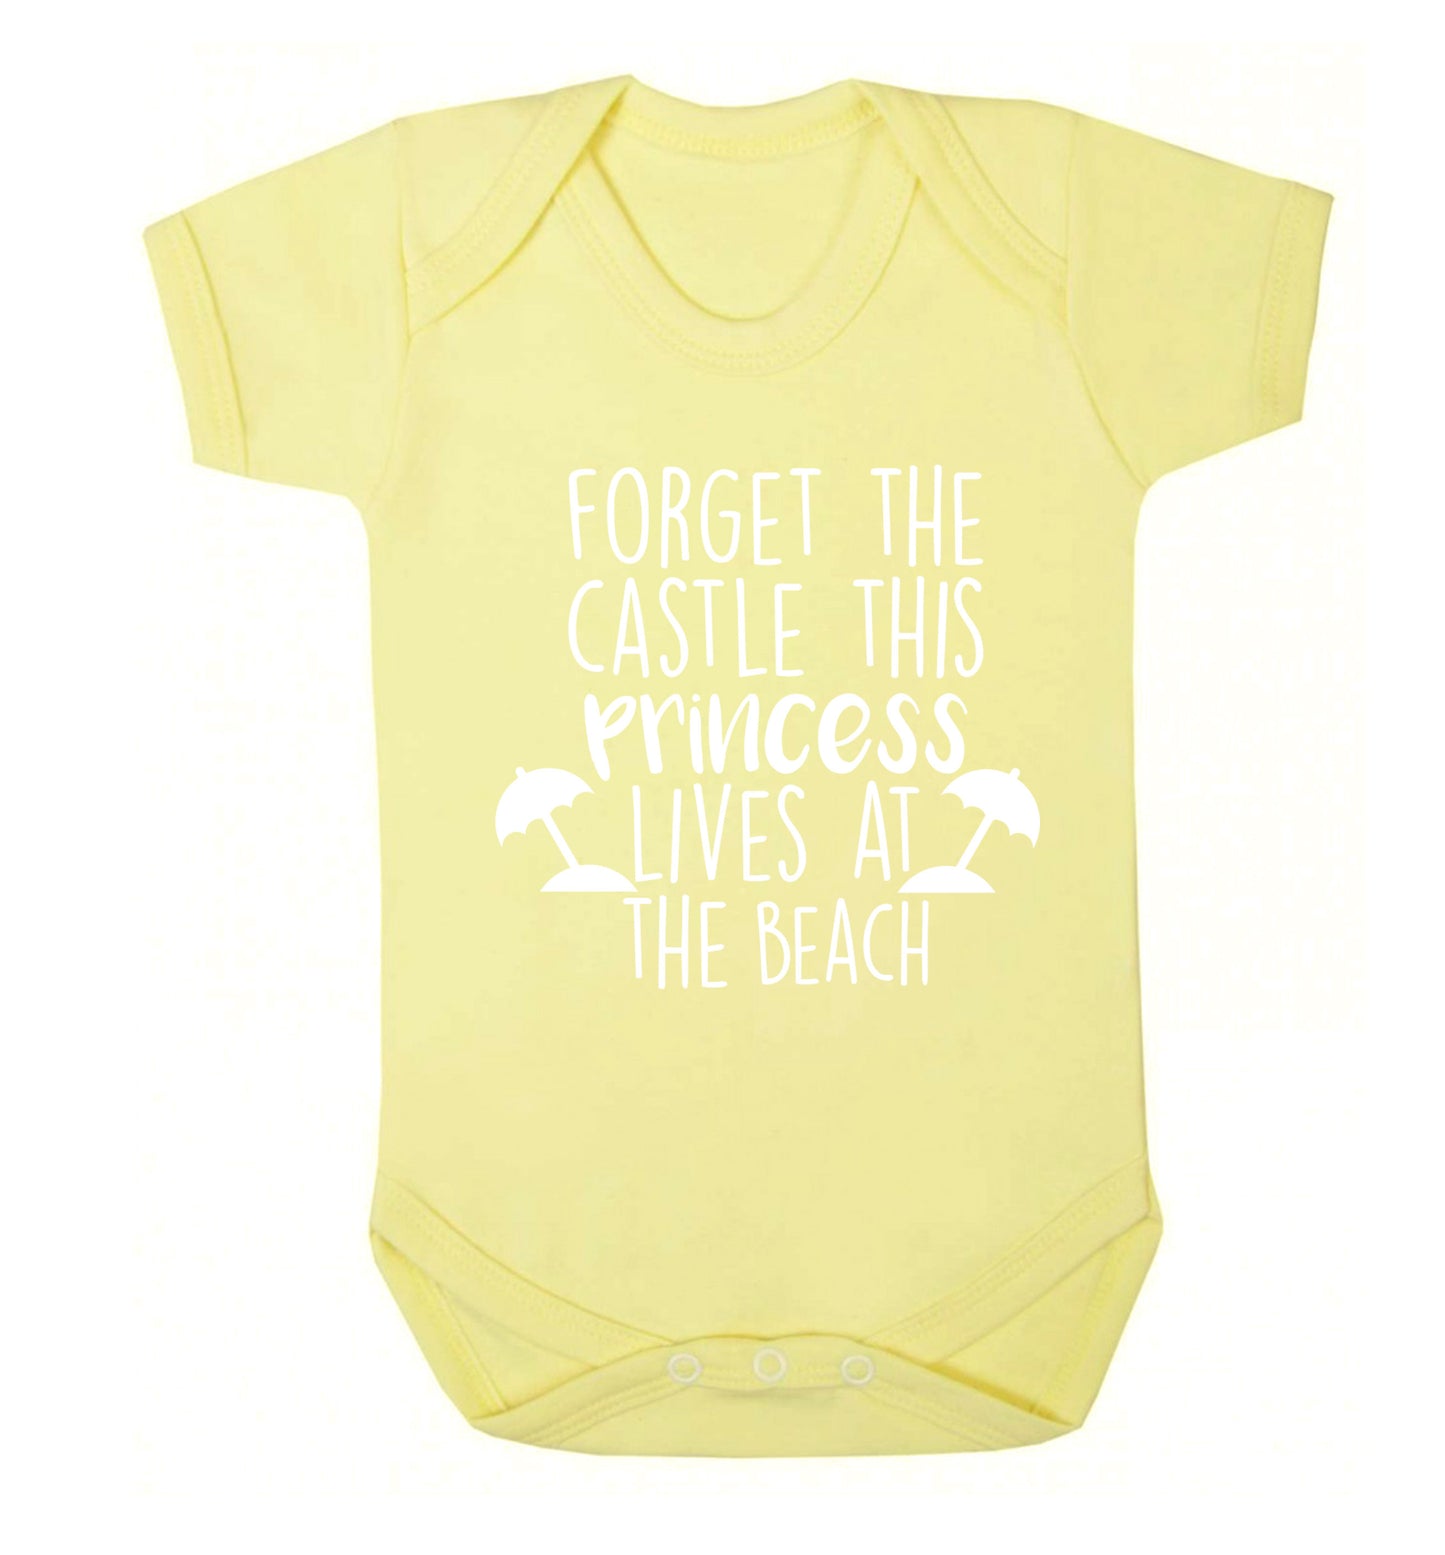 Forget the castle this princess lives at the beach Baby Vest pale yellow 18-24 months